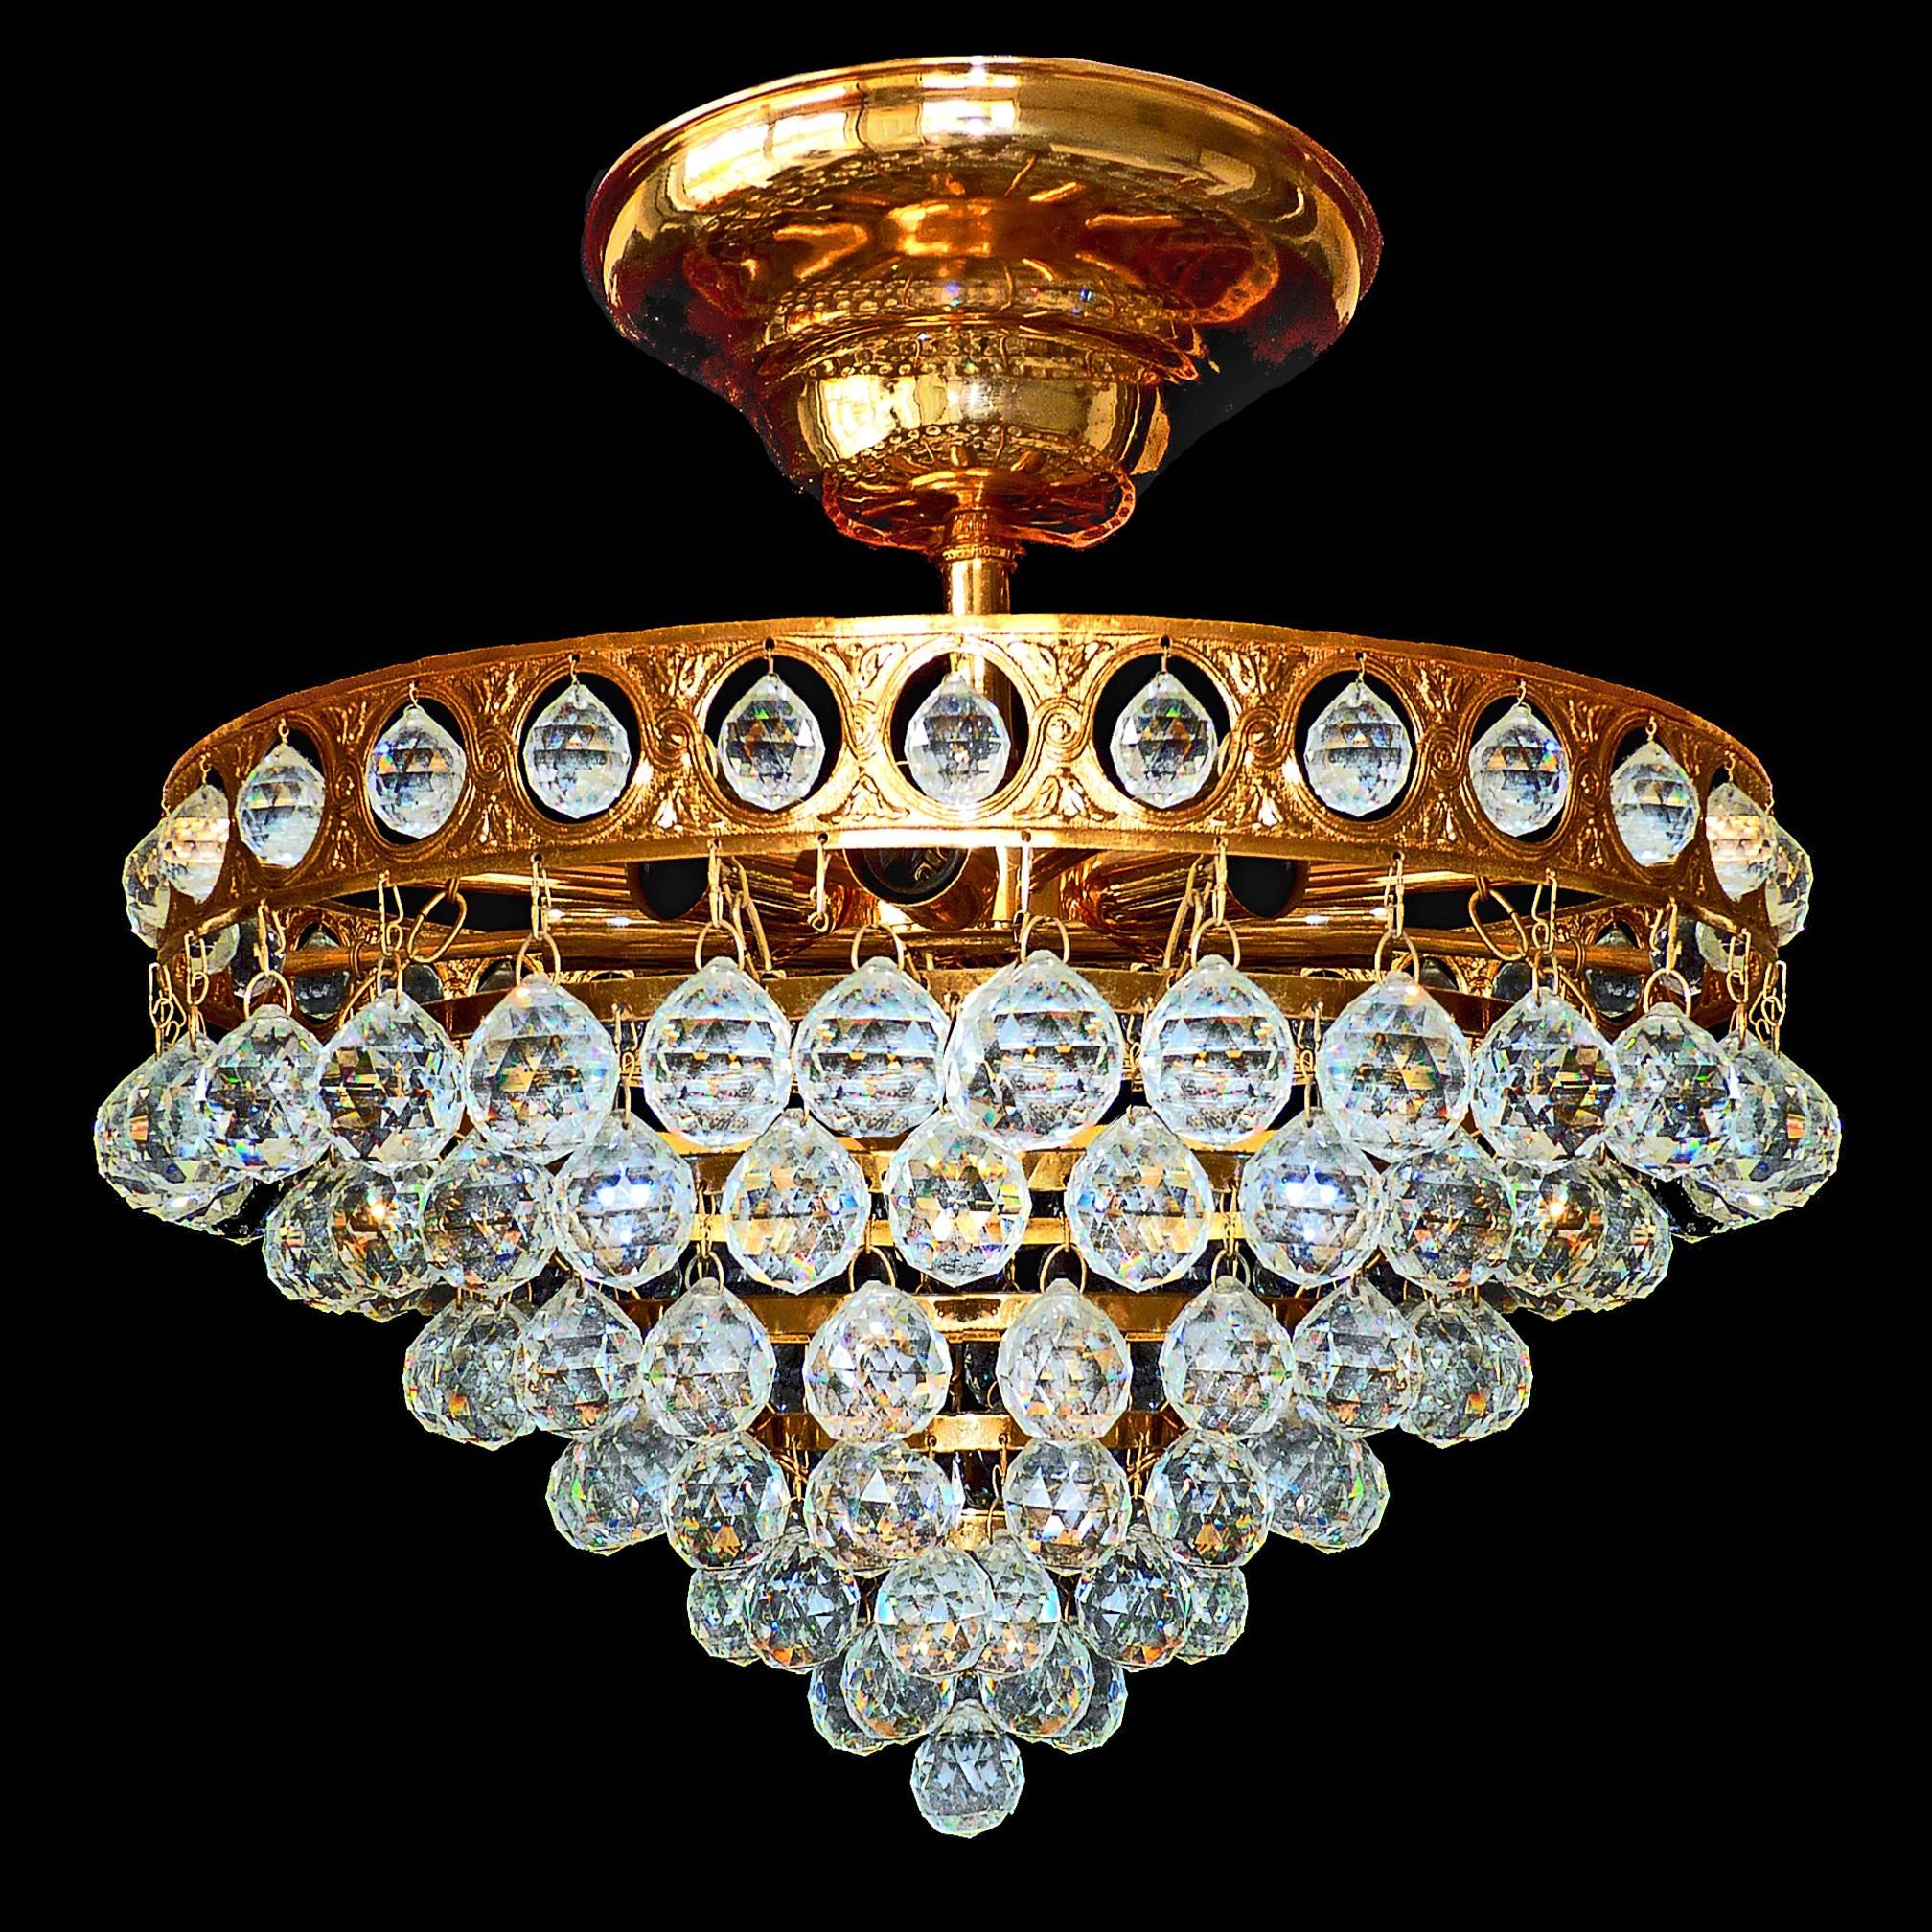 Stunning vintage high quality gold-plated chandelier. Large, heavy with 156 multifaceted Swarovski crystal balls in seven-tiers.
From a collection of a luxury hotel in Lisbon/Portugal
Eight light bulbs / good working condition
Weight 26 lb. (12